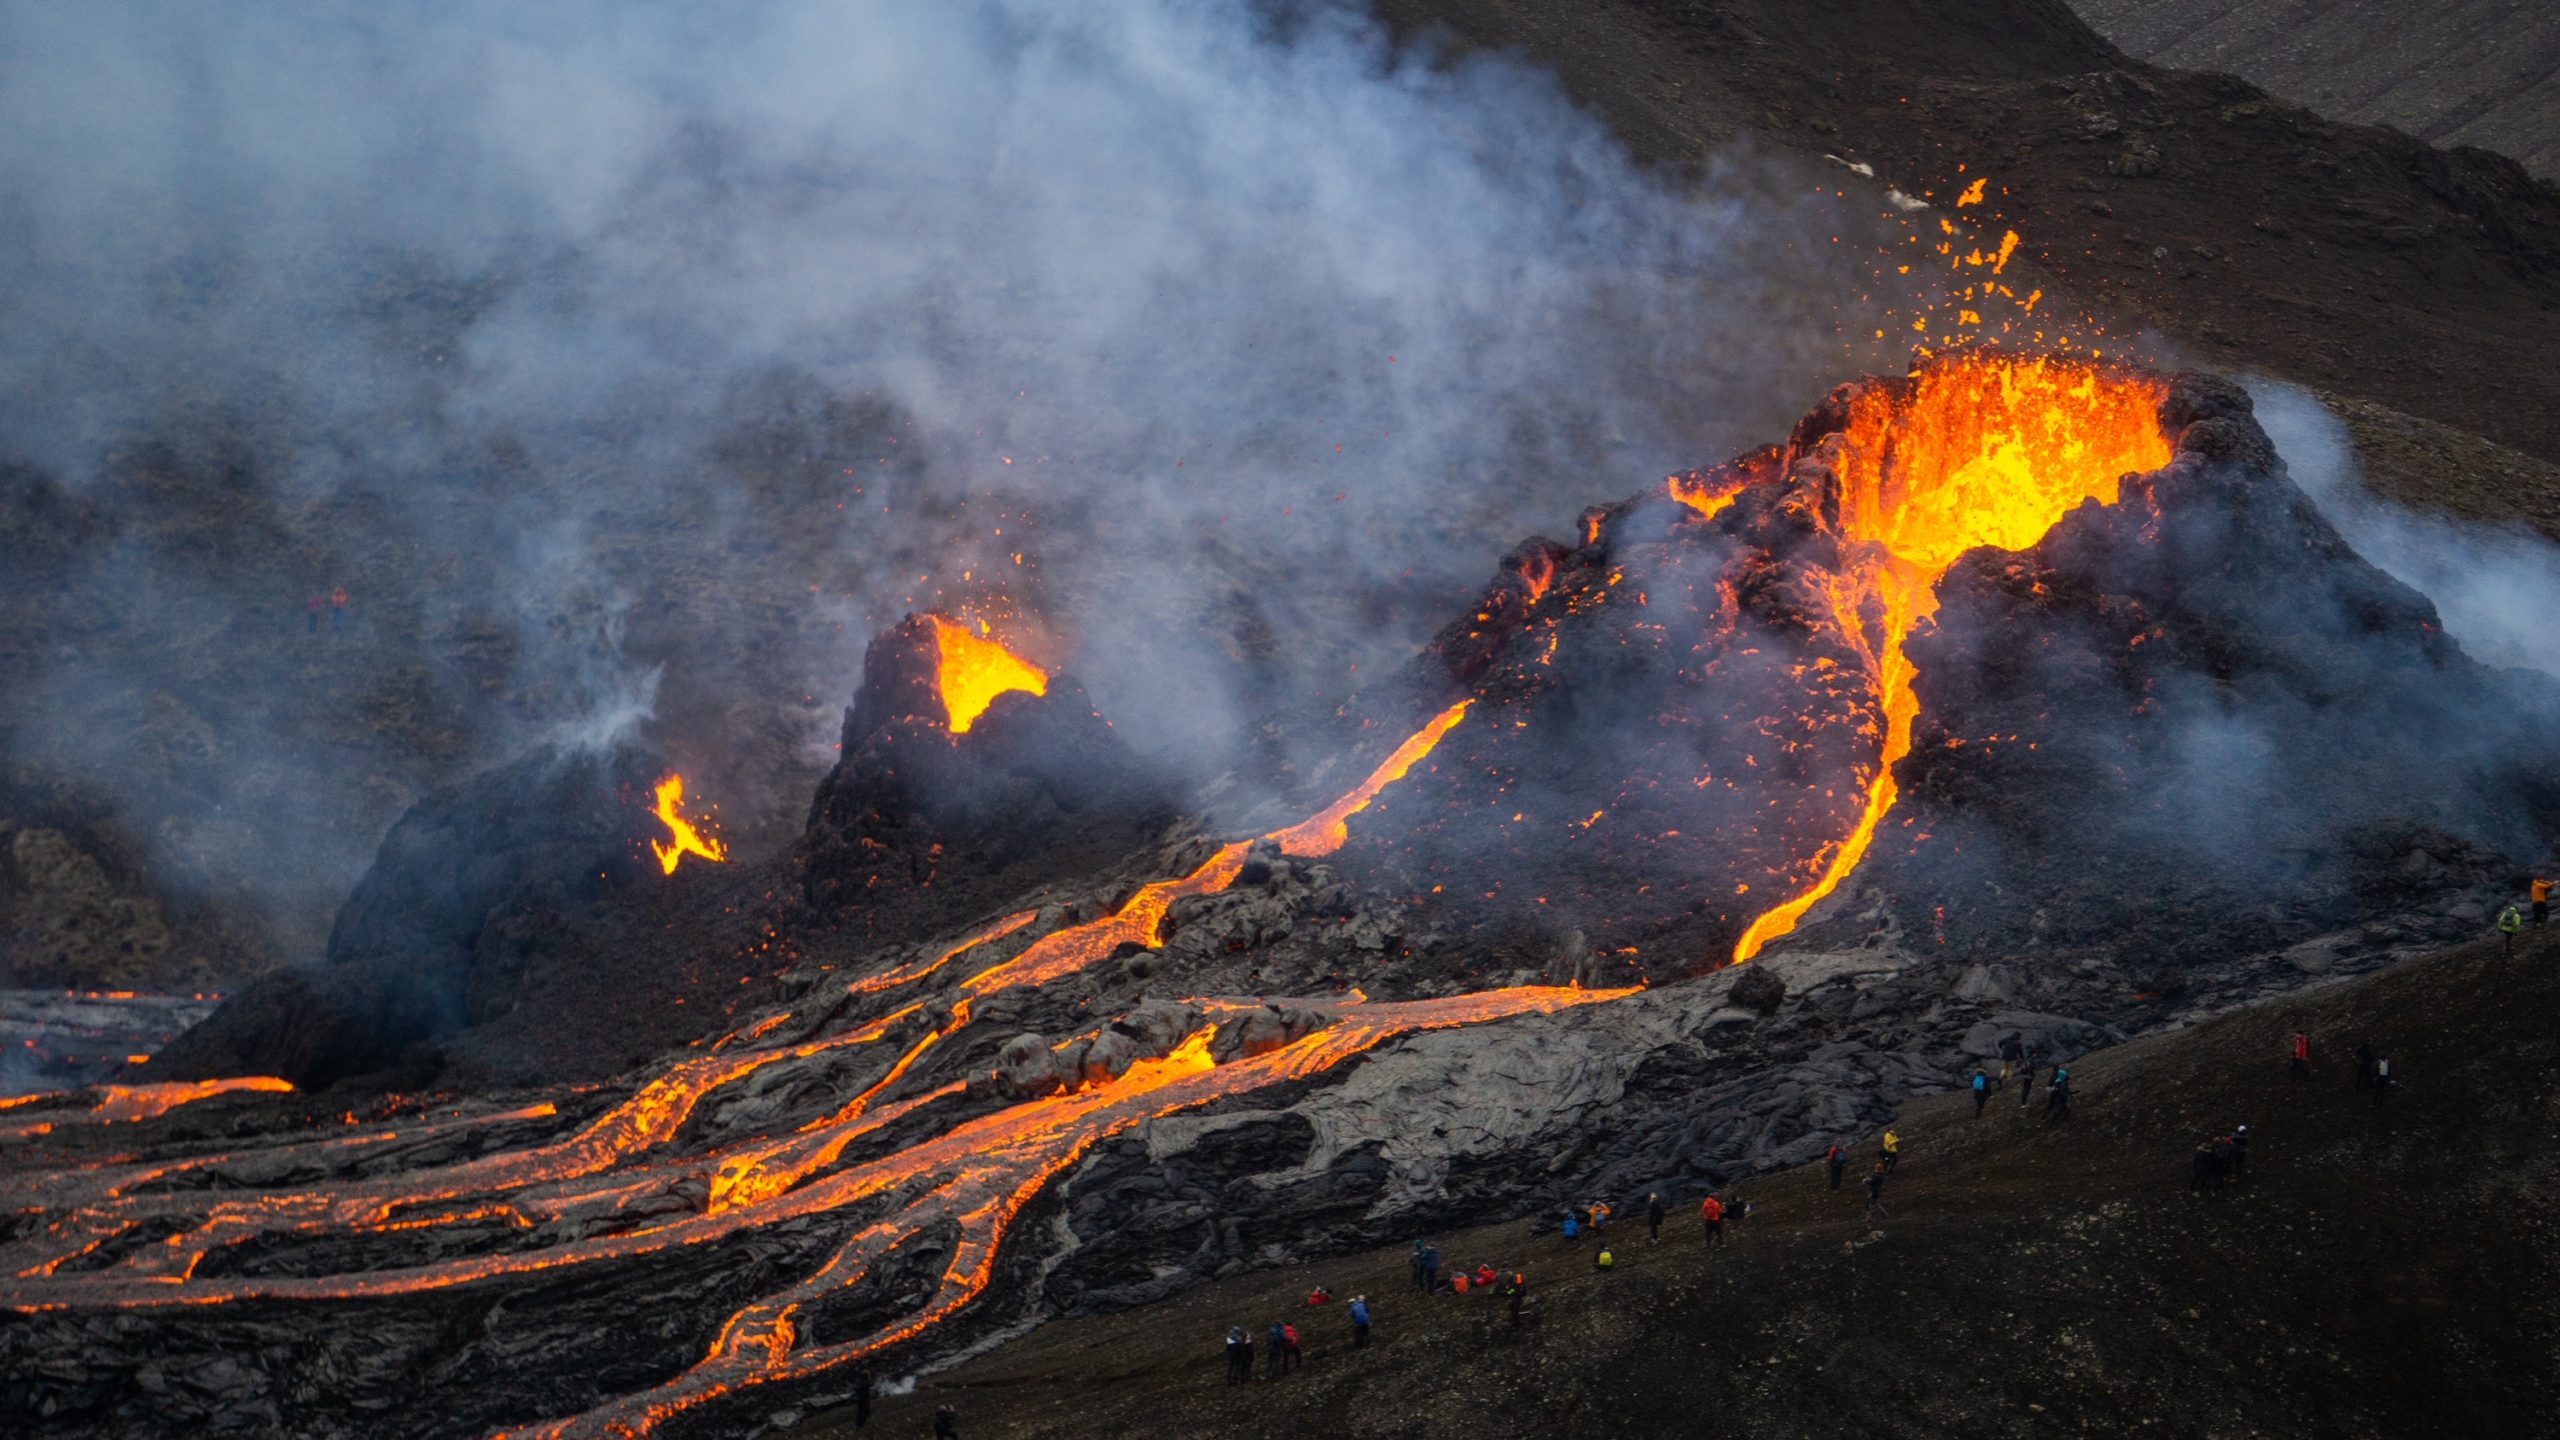 Iceland's Erupting Volcano Rivers of Lava and 30,000 Earthquakes